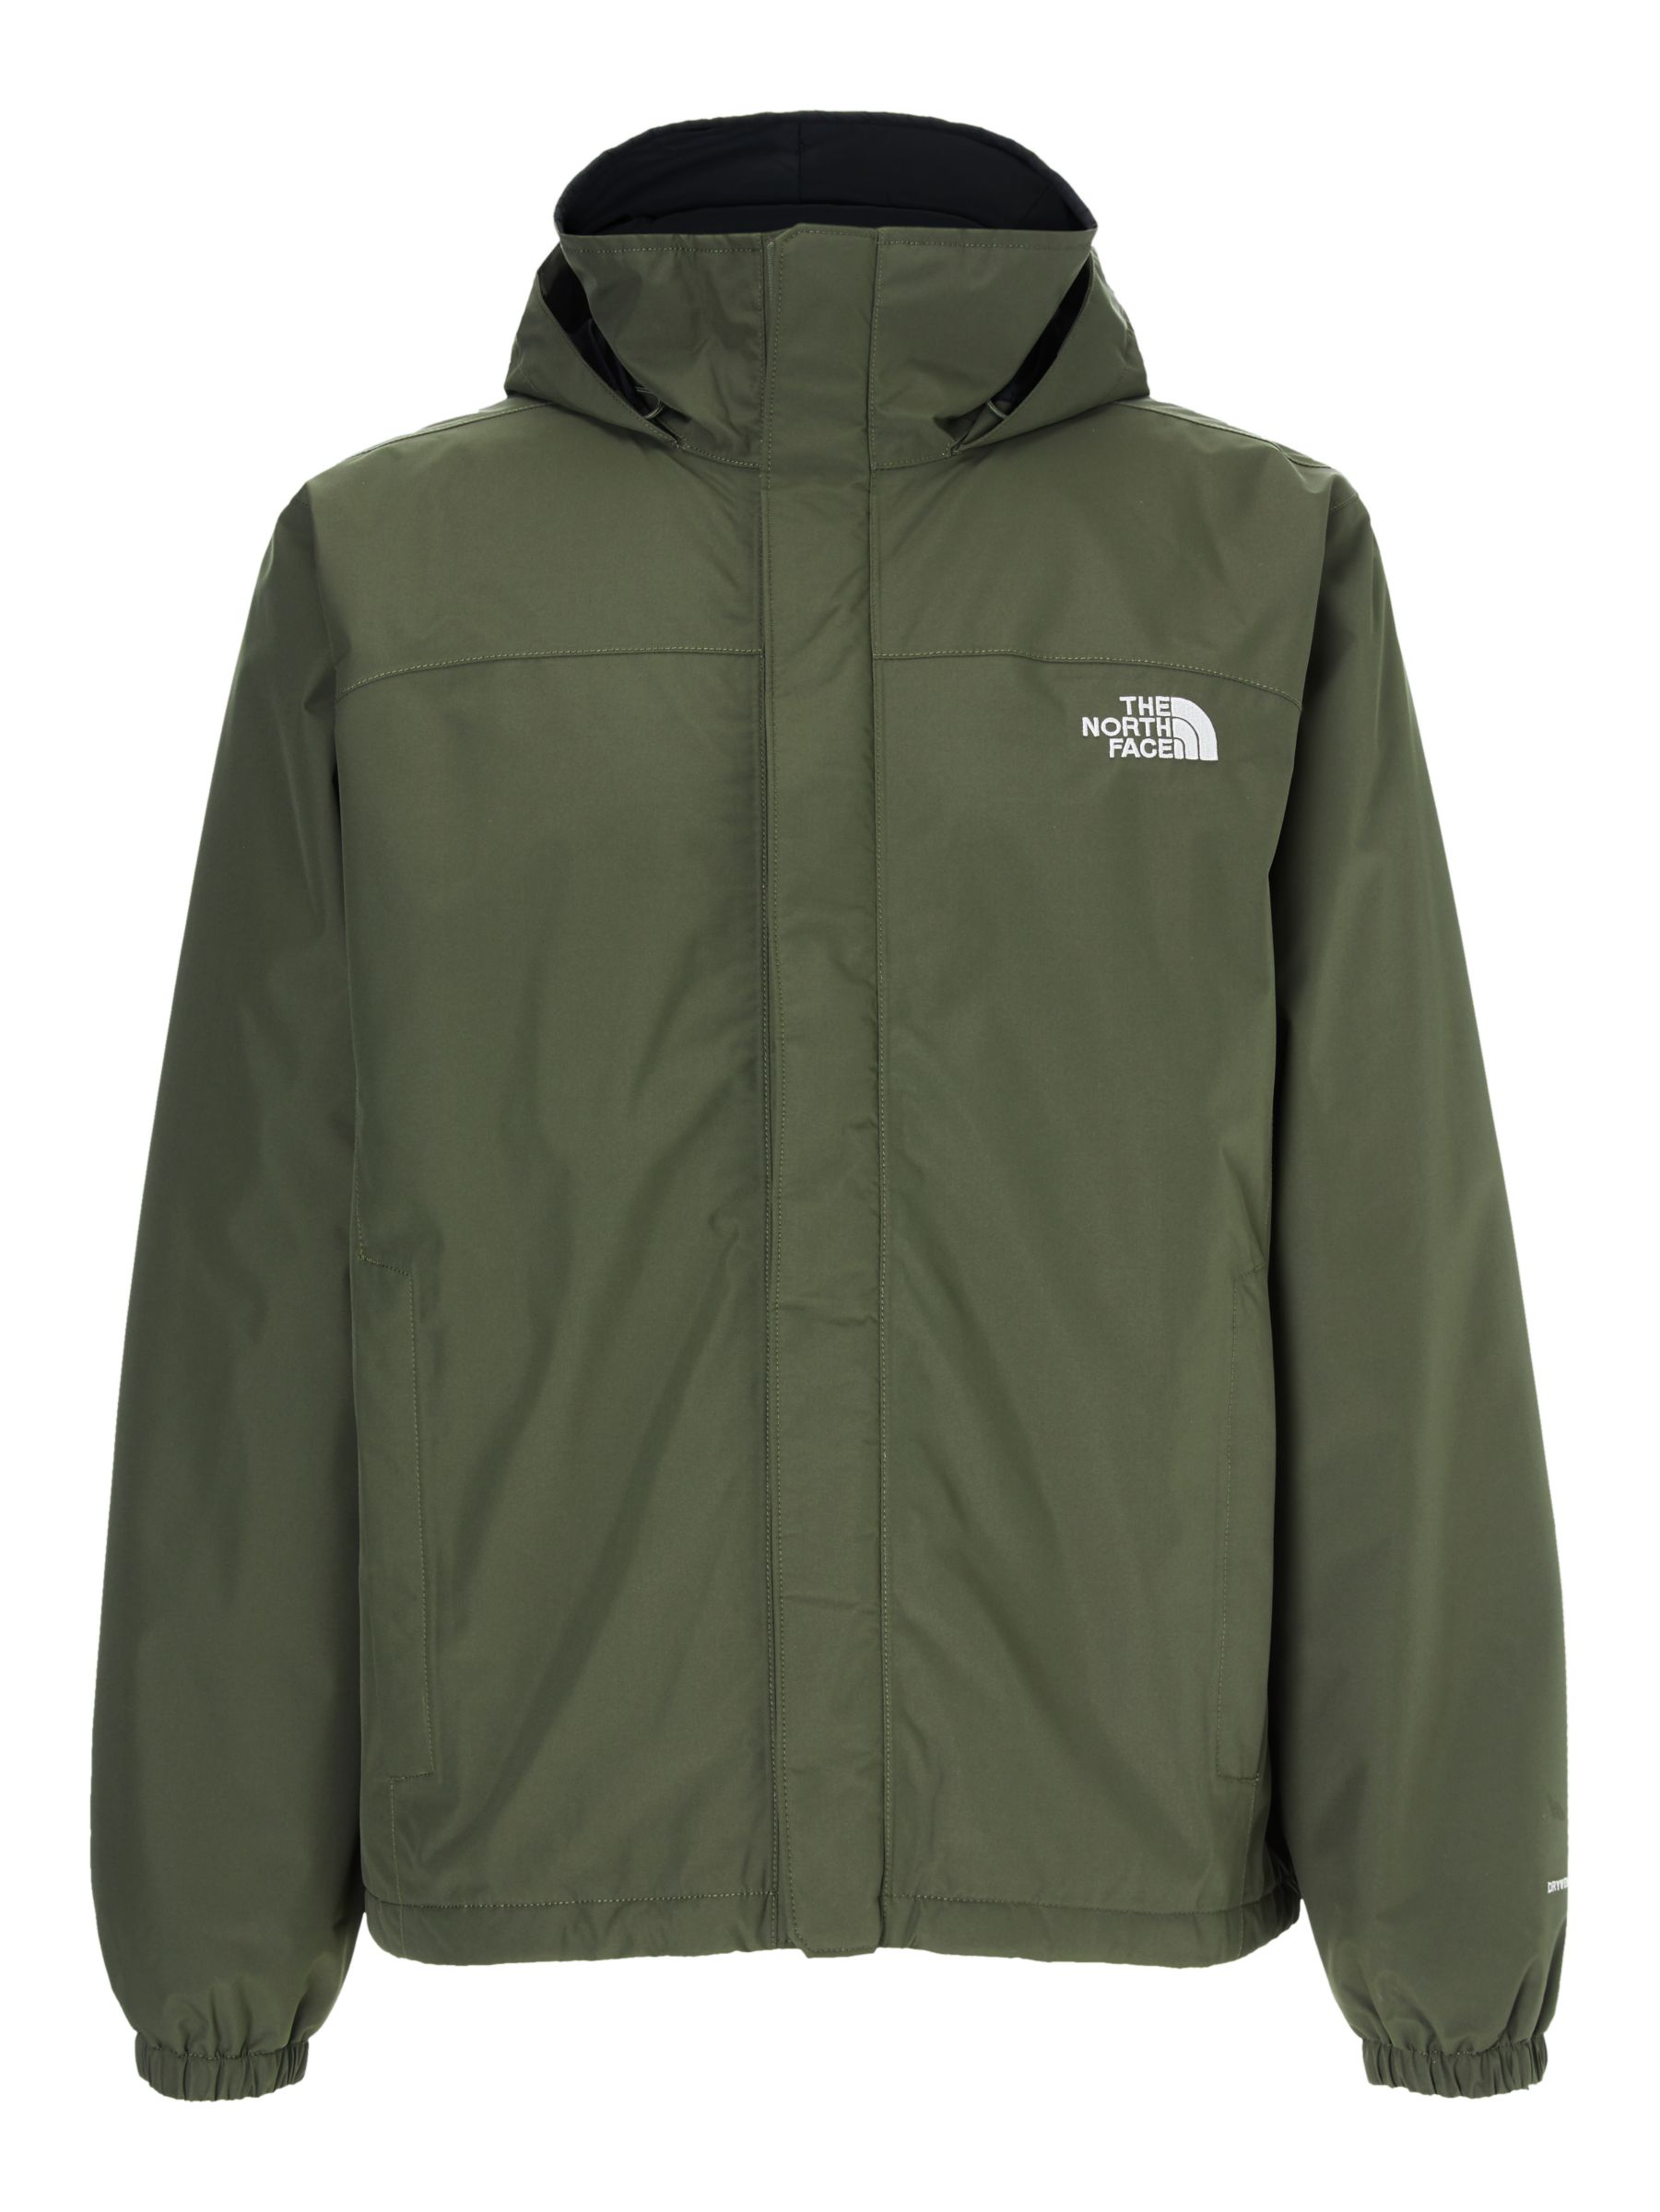 the north face green coat 